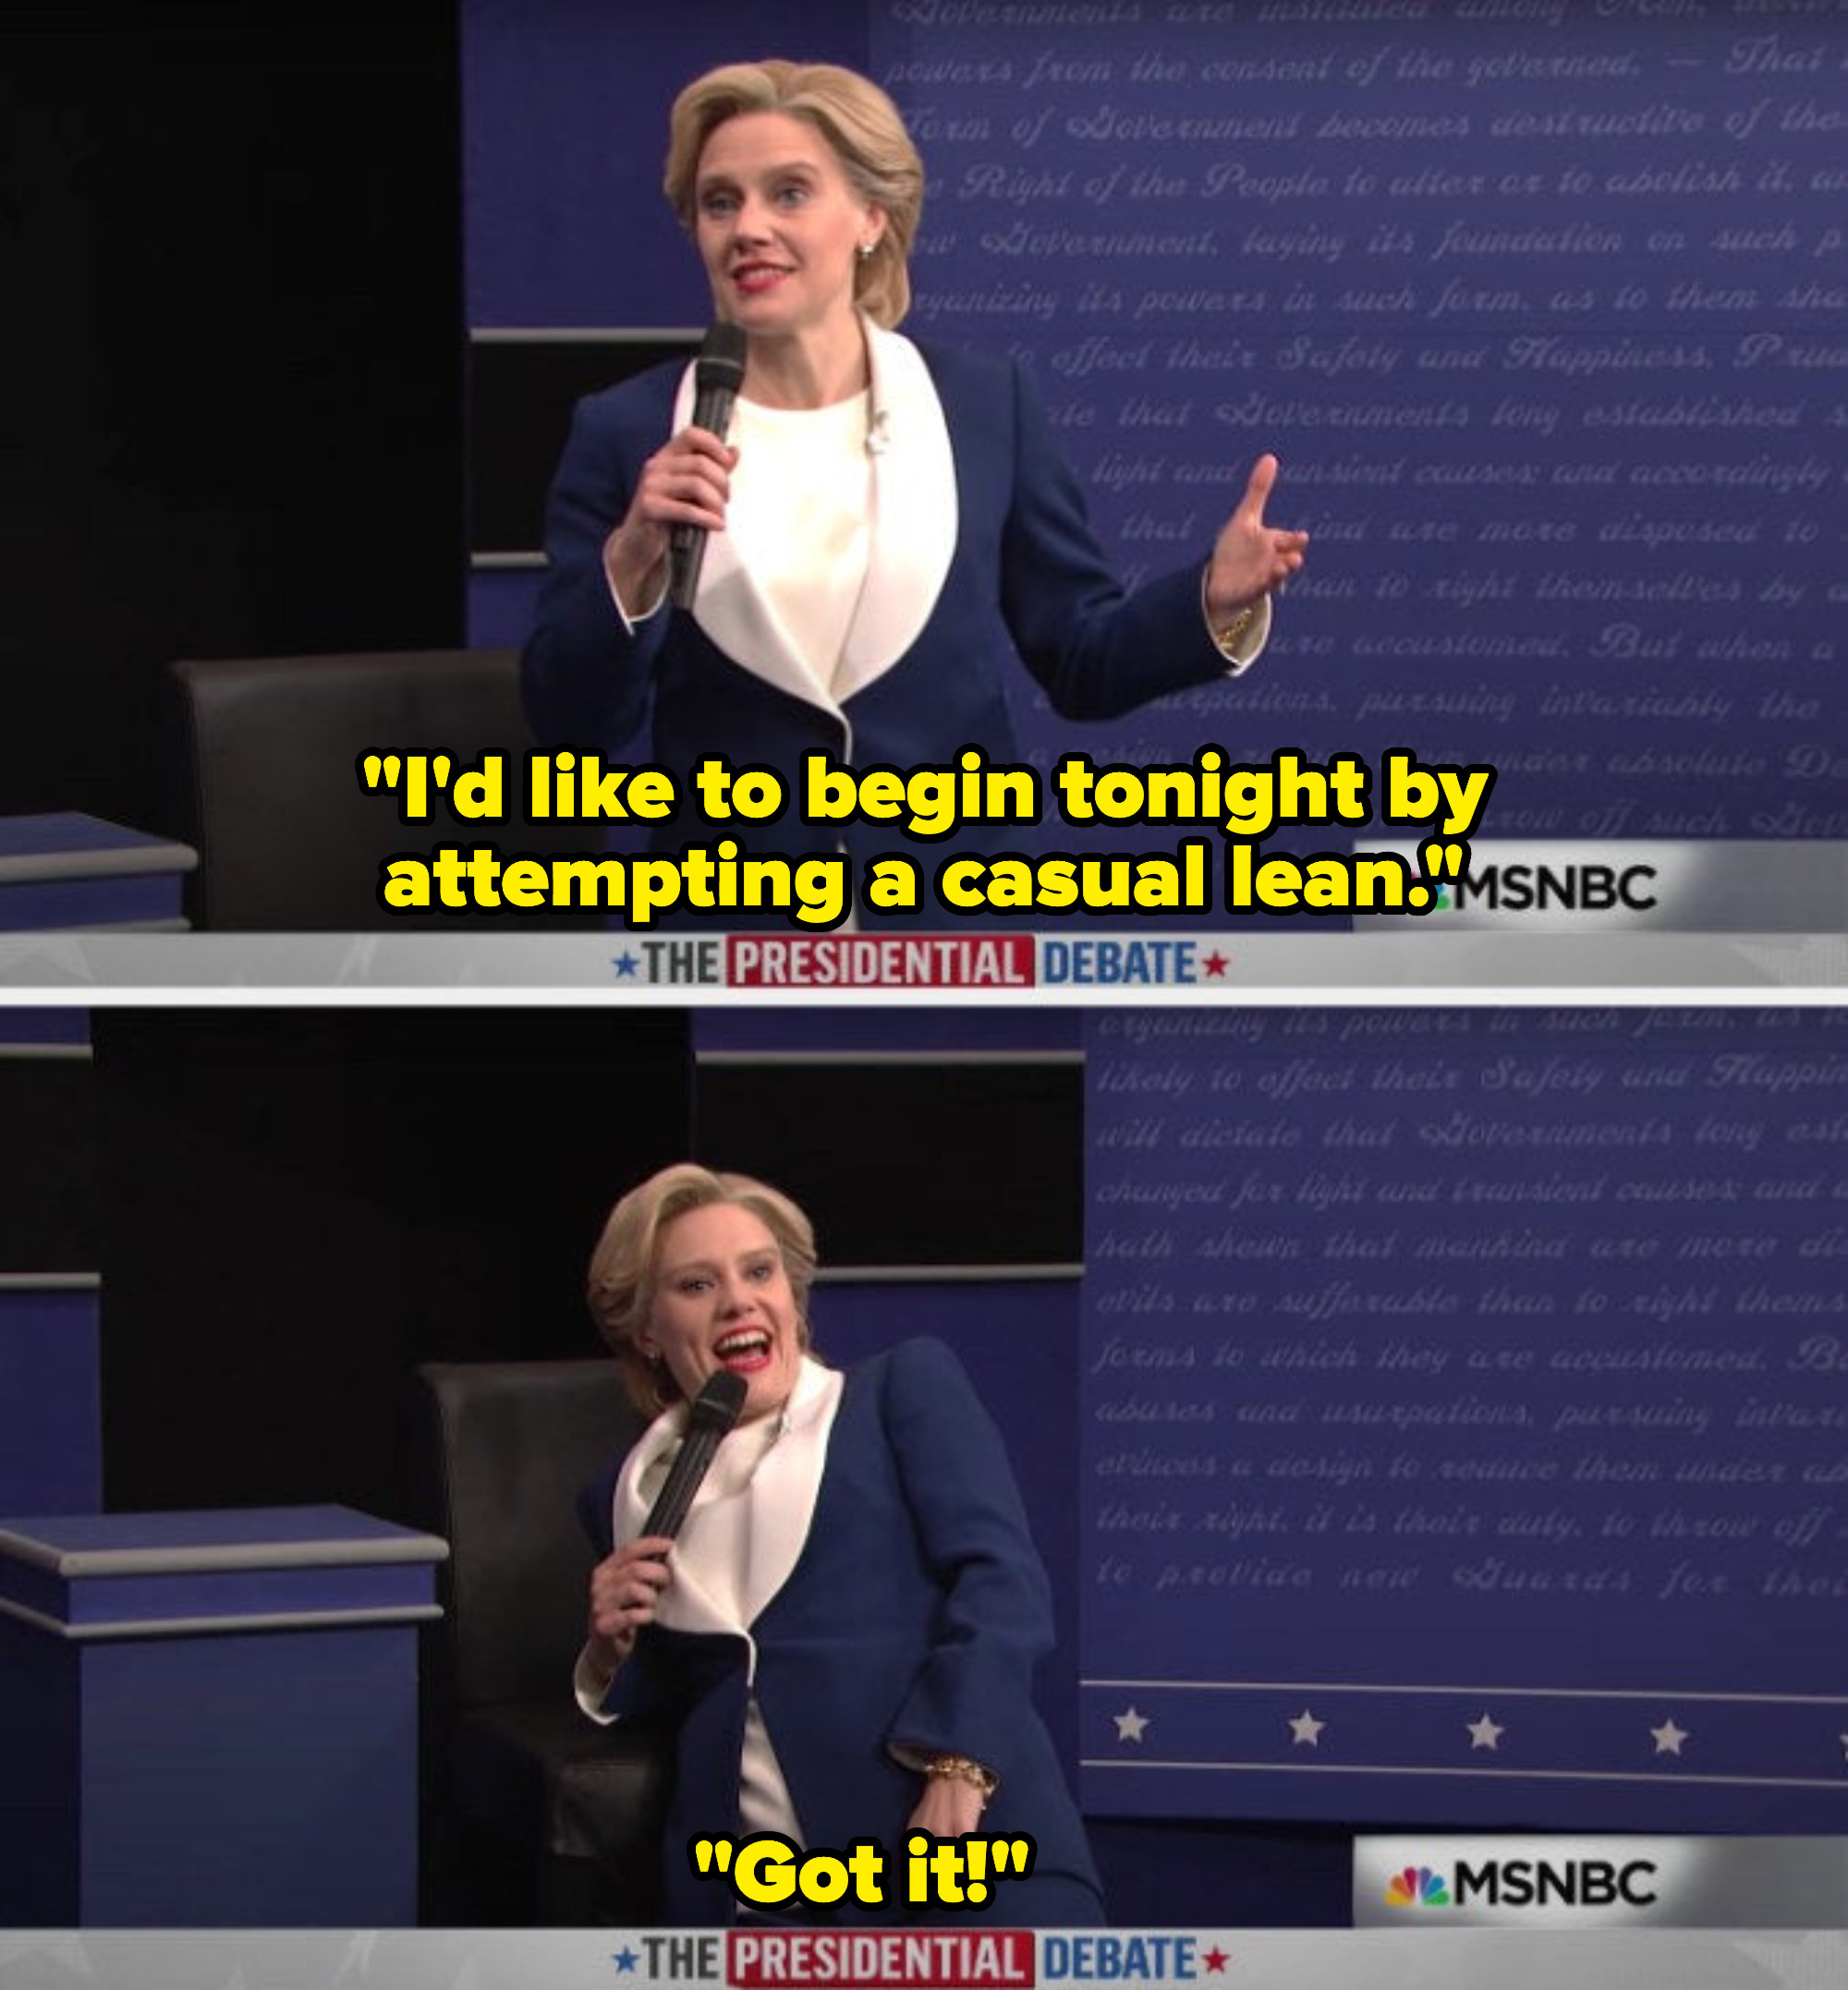 Kate as Hillary Clinton saying she&#x27;s going to attempt a casual lean, doing a very unnatural pose, and saying &quot;Got it&quot;